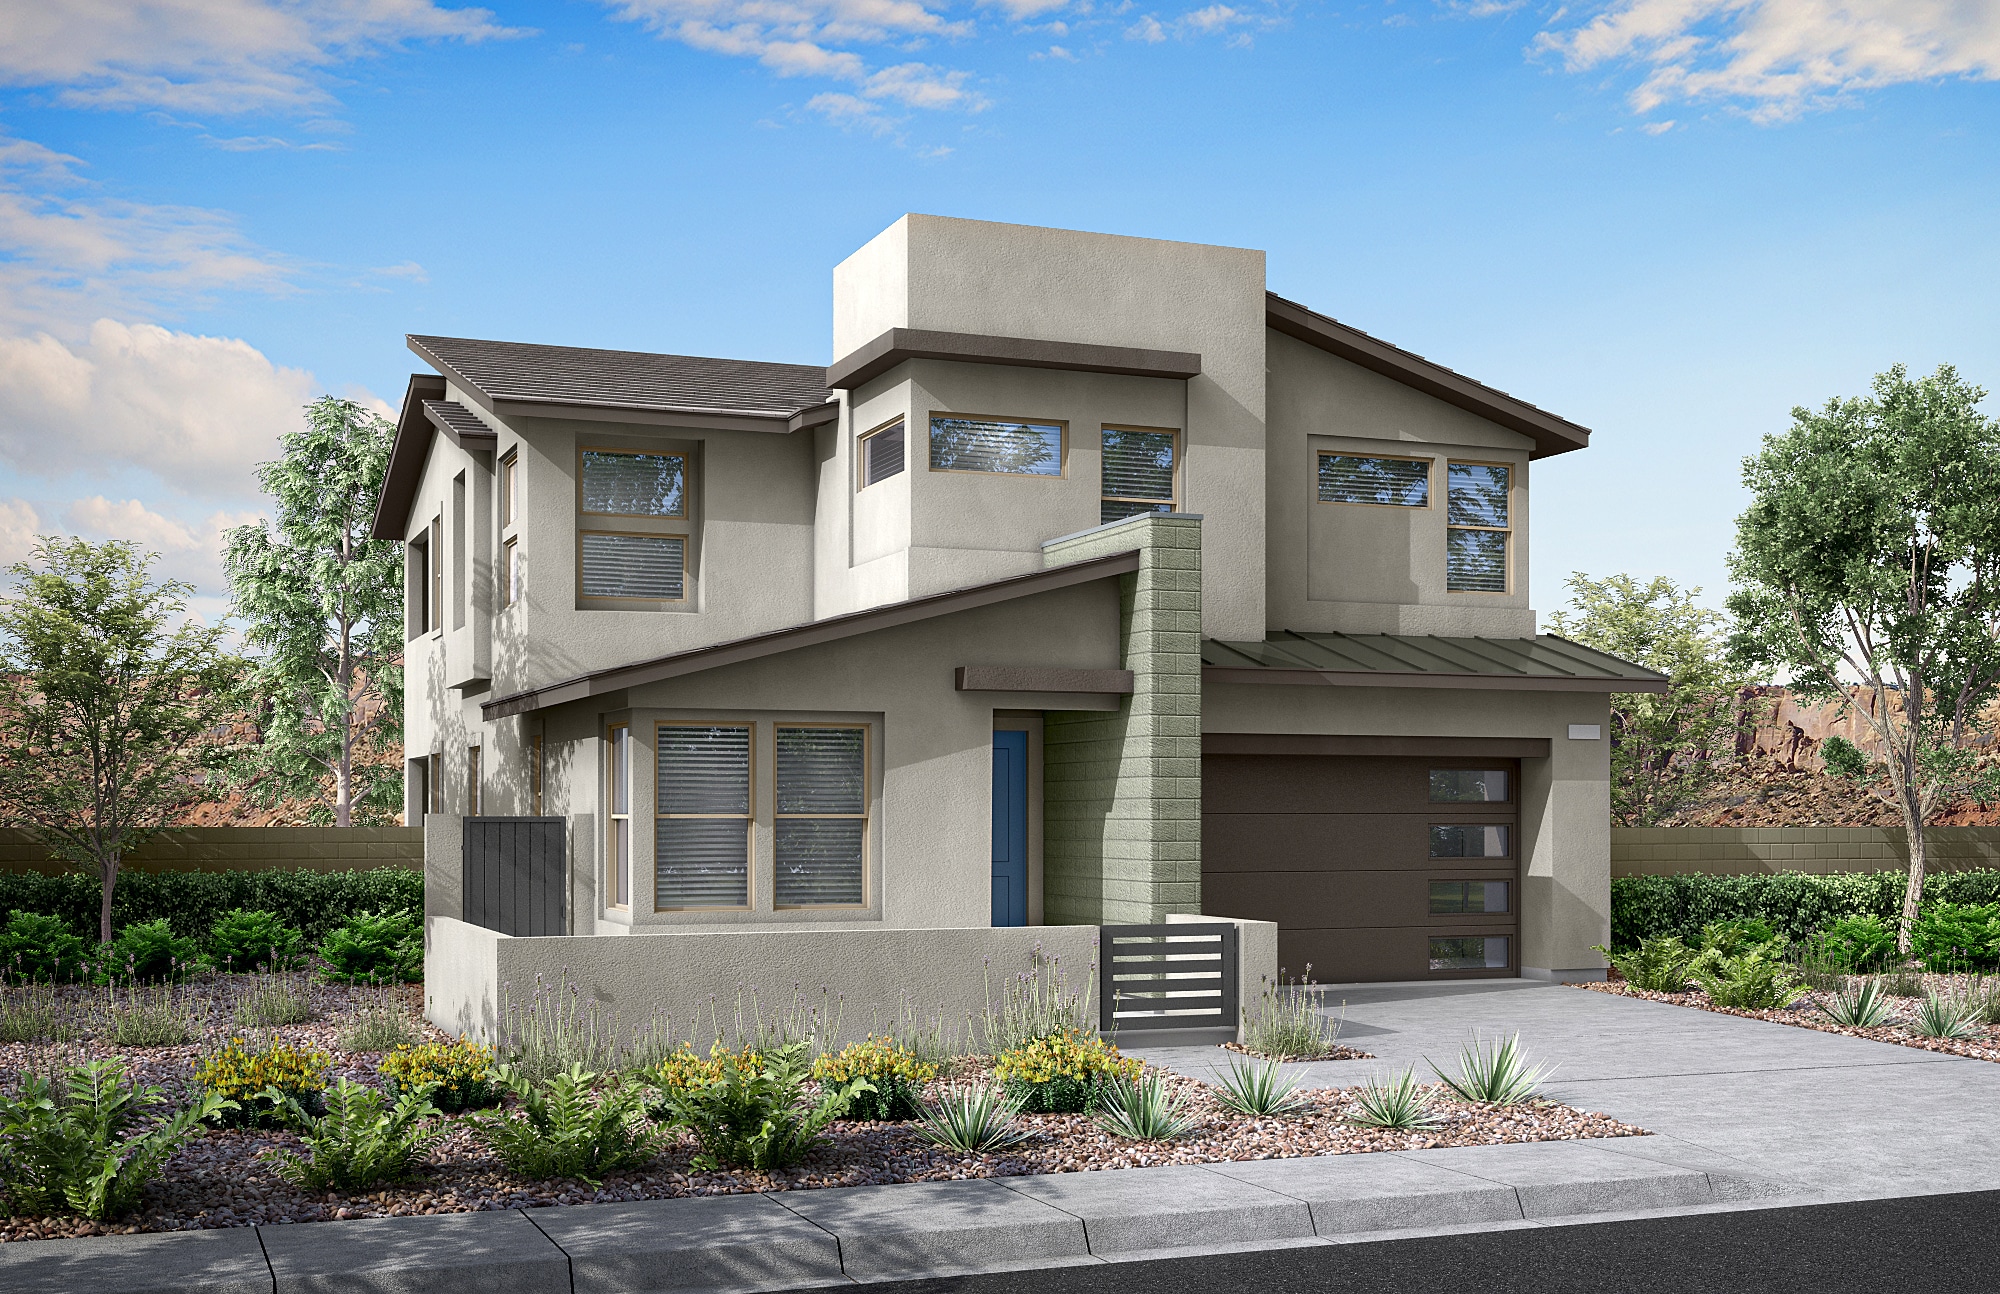 Front Elevation B of Plan 2 at Arroyo's Edge by Tri Pointe Homes